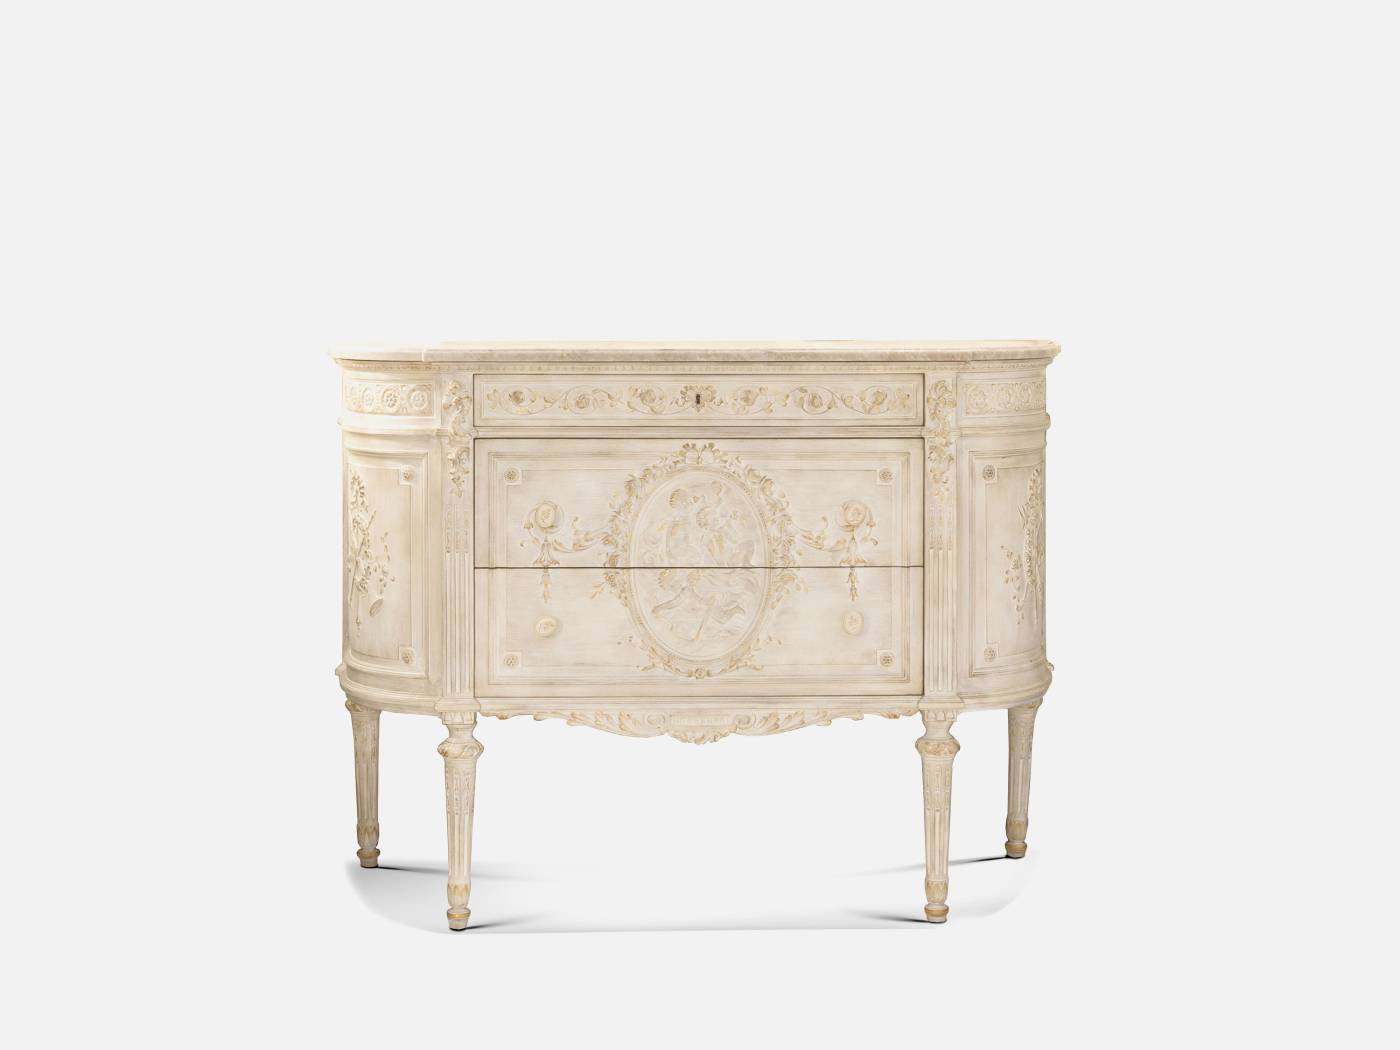 ART. 2011-19 - C.G. Capelletti quality furniture and timeless elegance with luxury made in italy contemporary Chest of drawers.